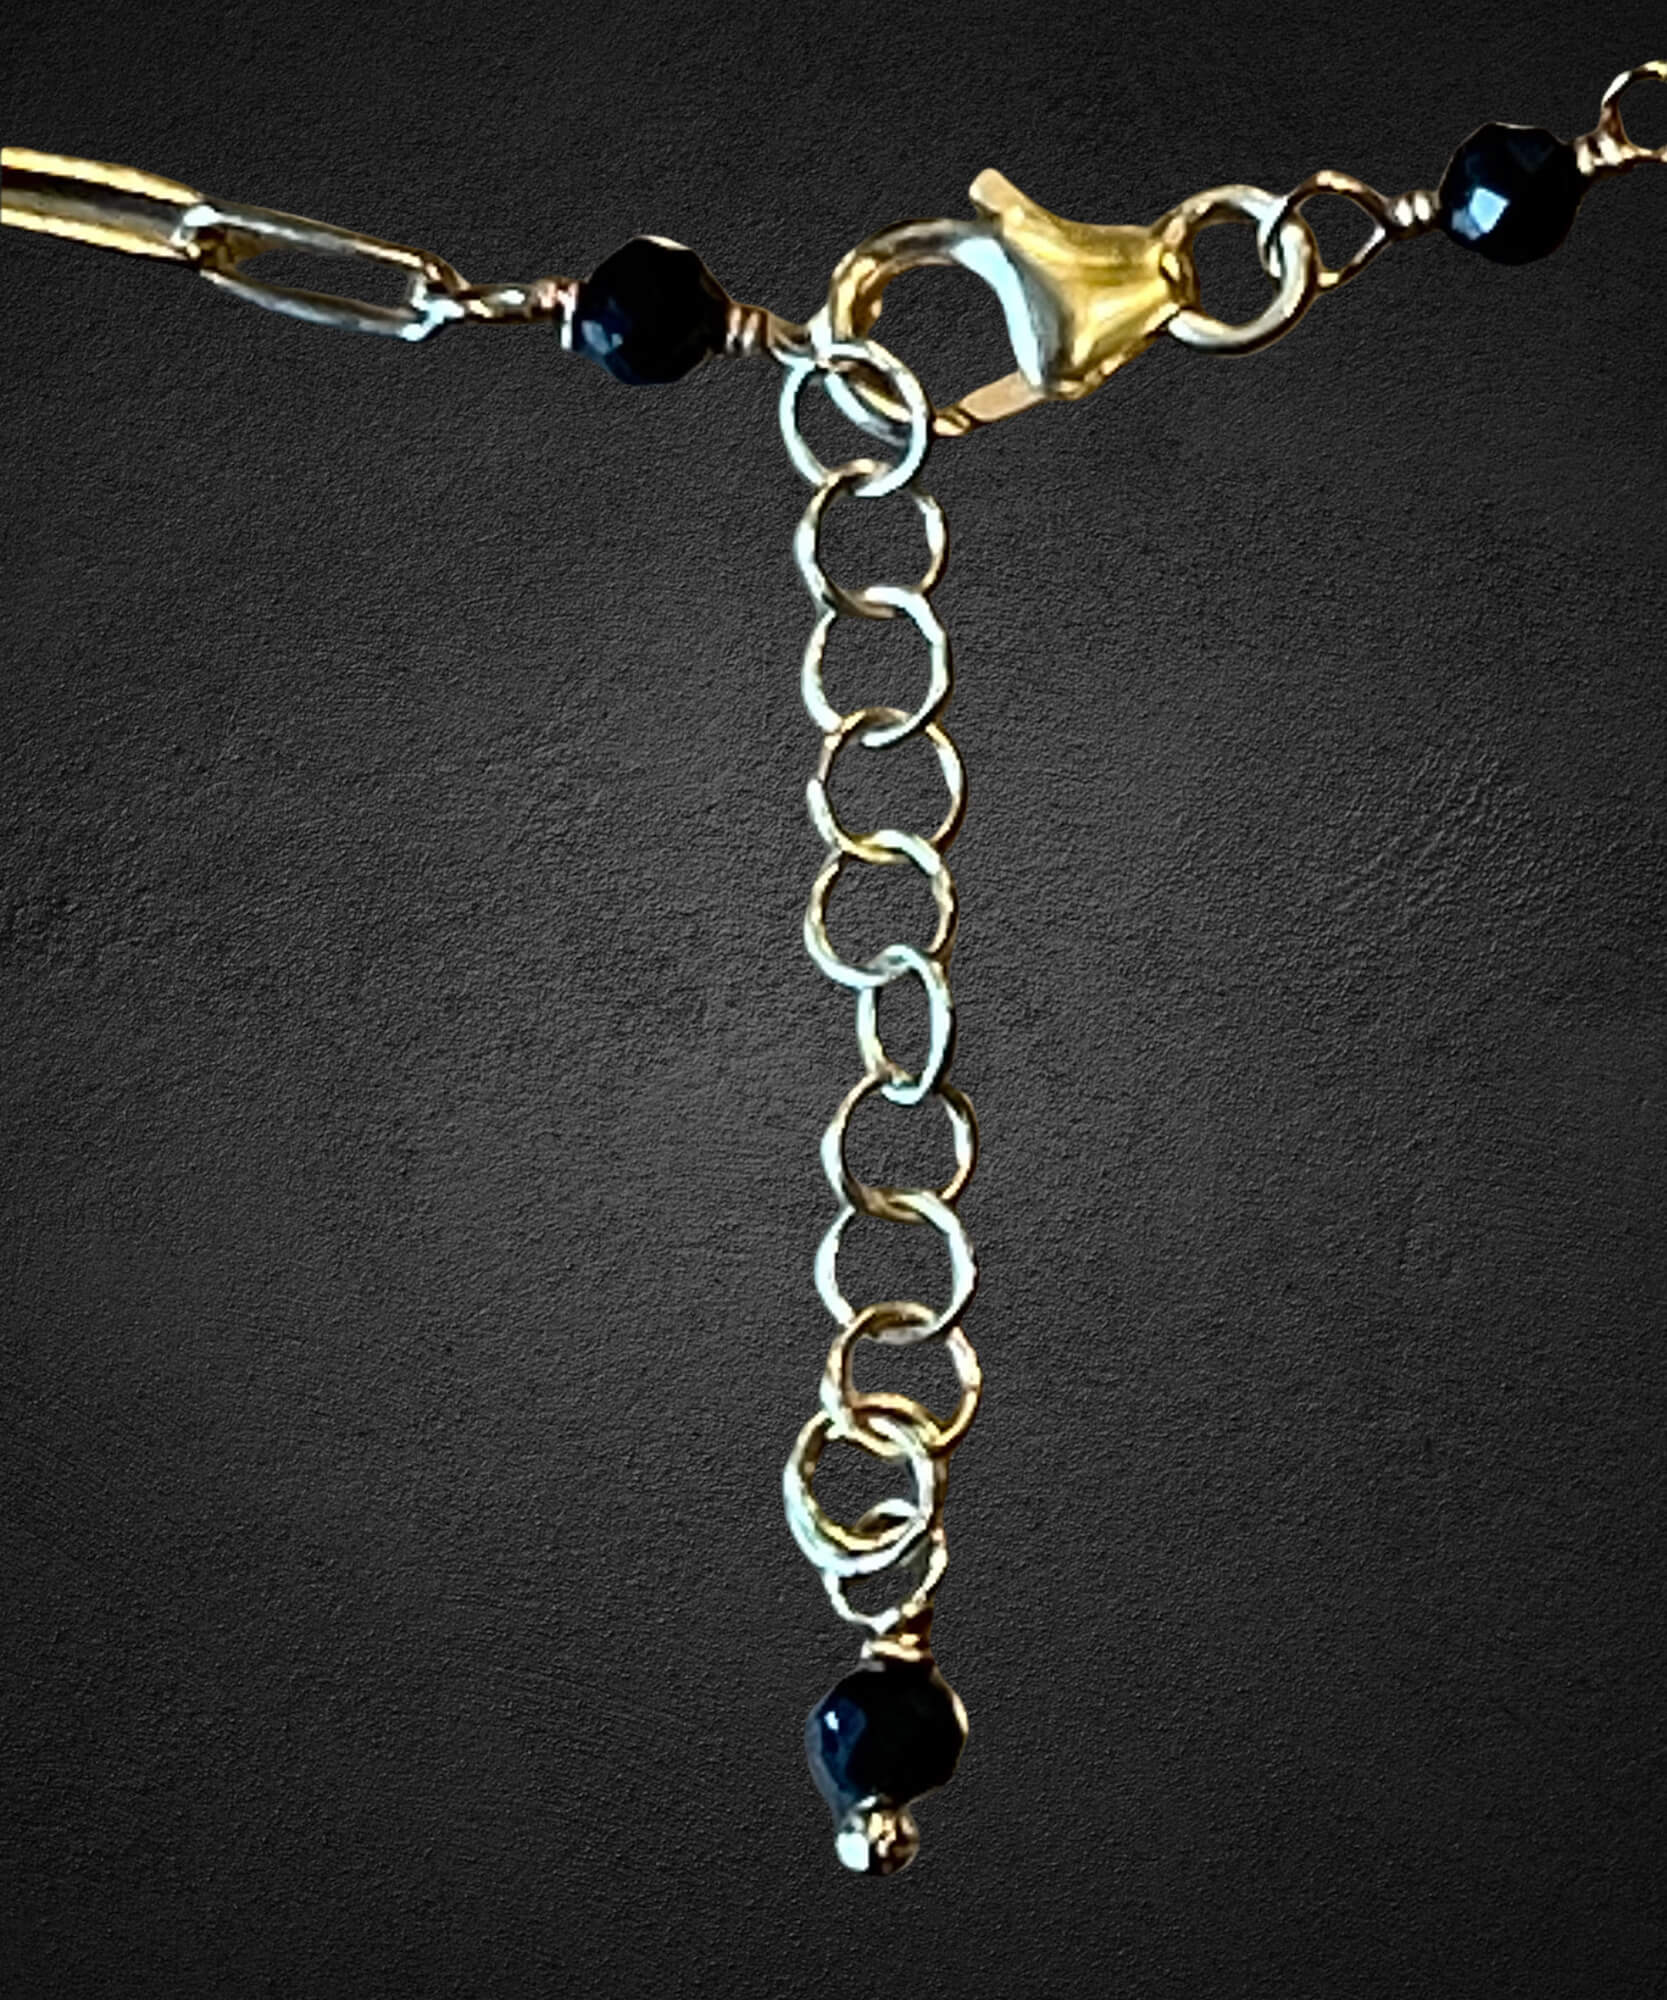 Gold-plated link chain with 2 onyx stones